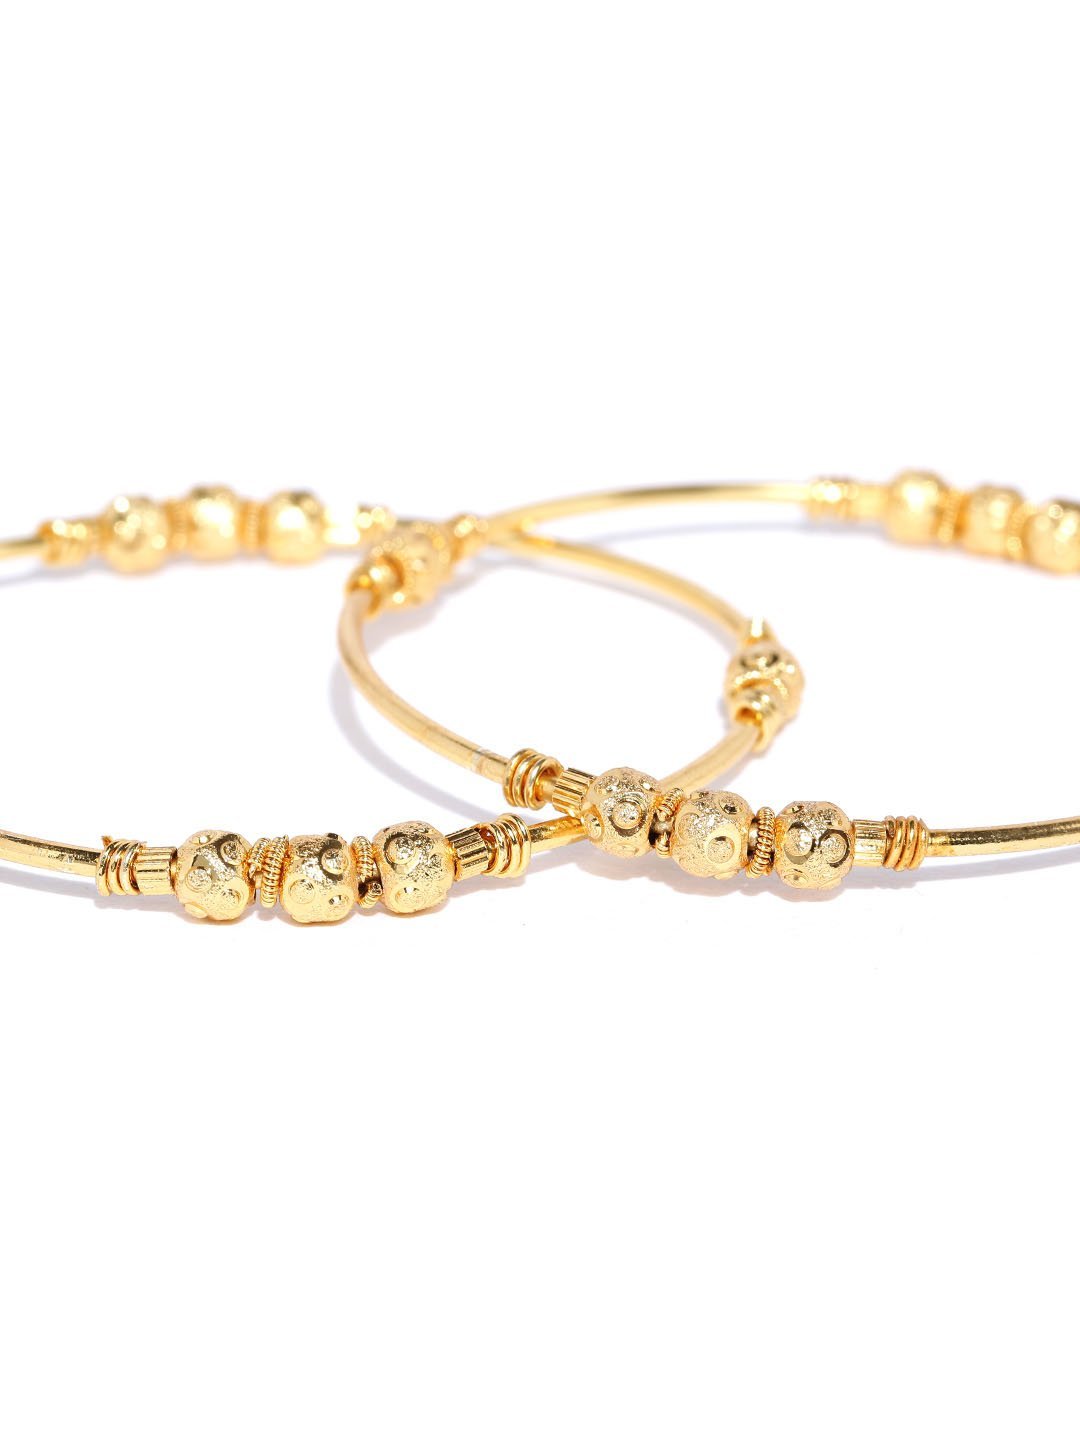 Women's Gold-Toned Beaded Designed Traditional Bangles Set Of 2 - Priyaasi